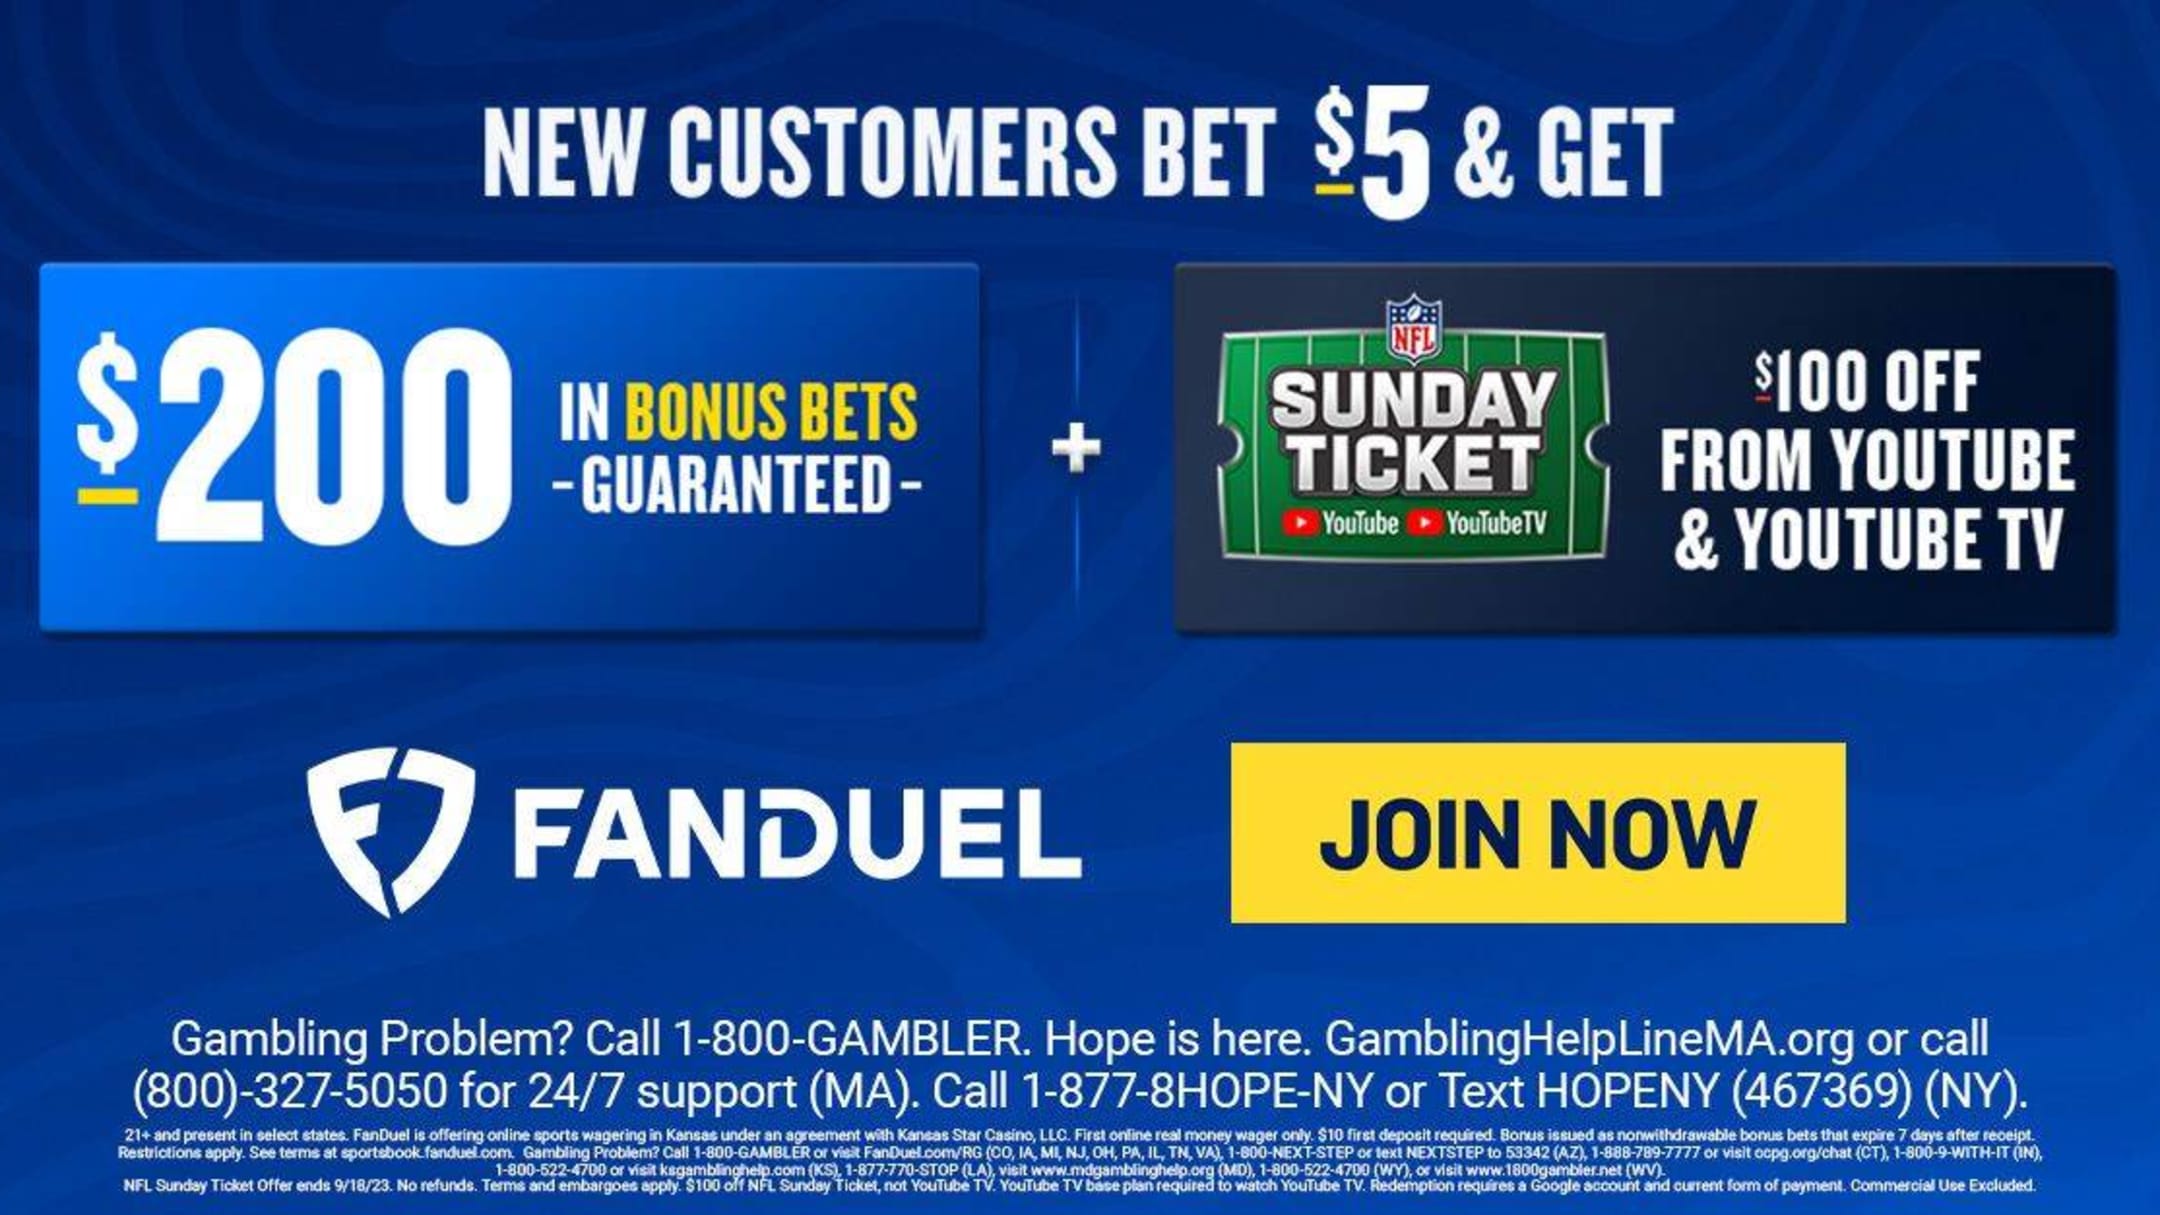 NFL Sunday Ticket Promo Code 2023: Get $100 Sunday Ticket When You